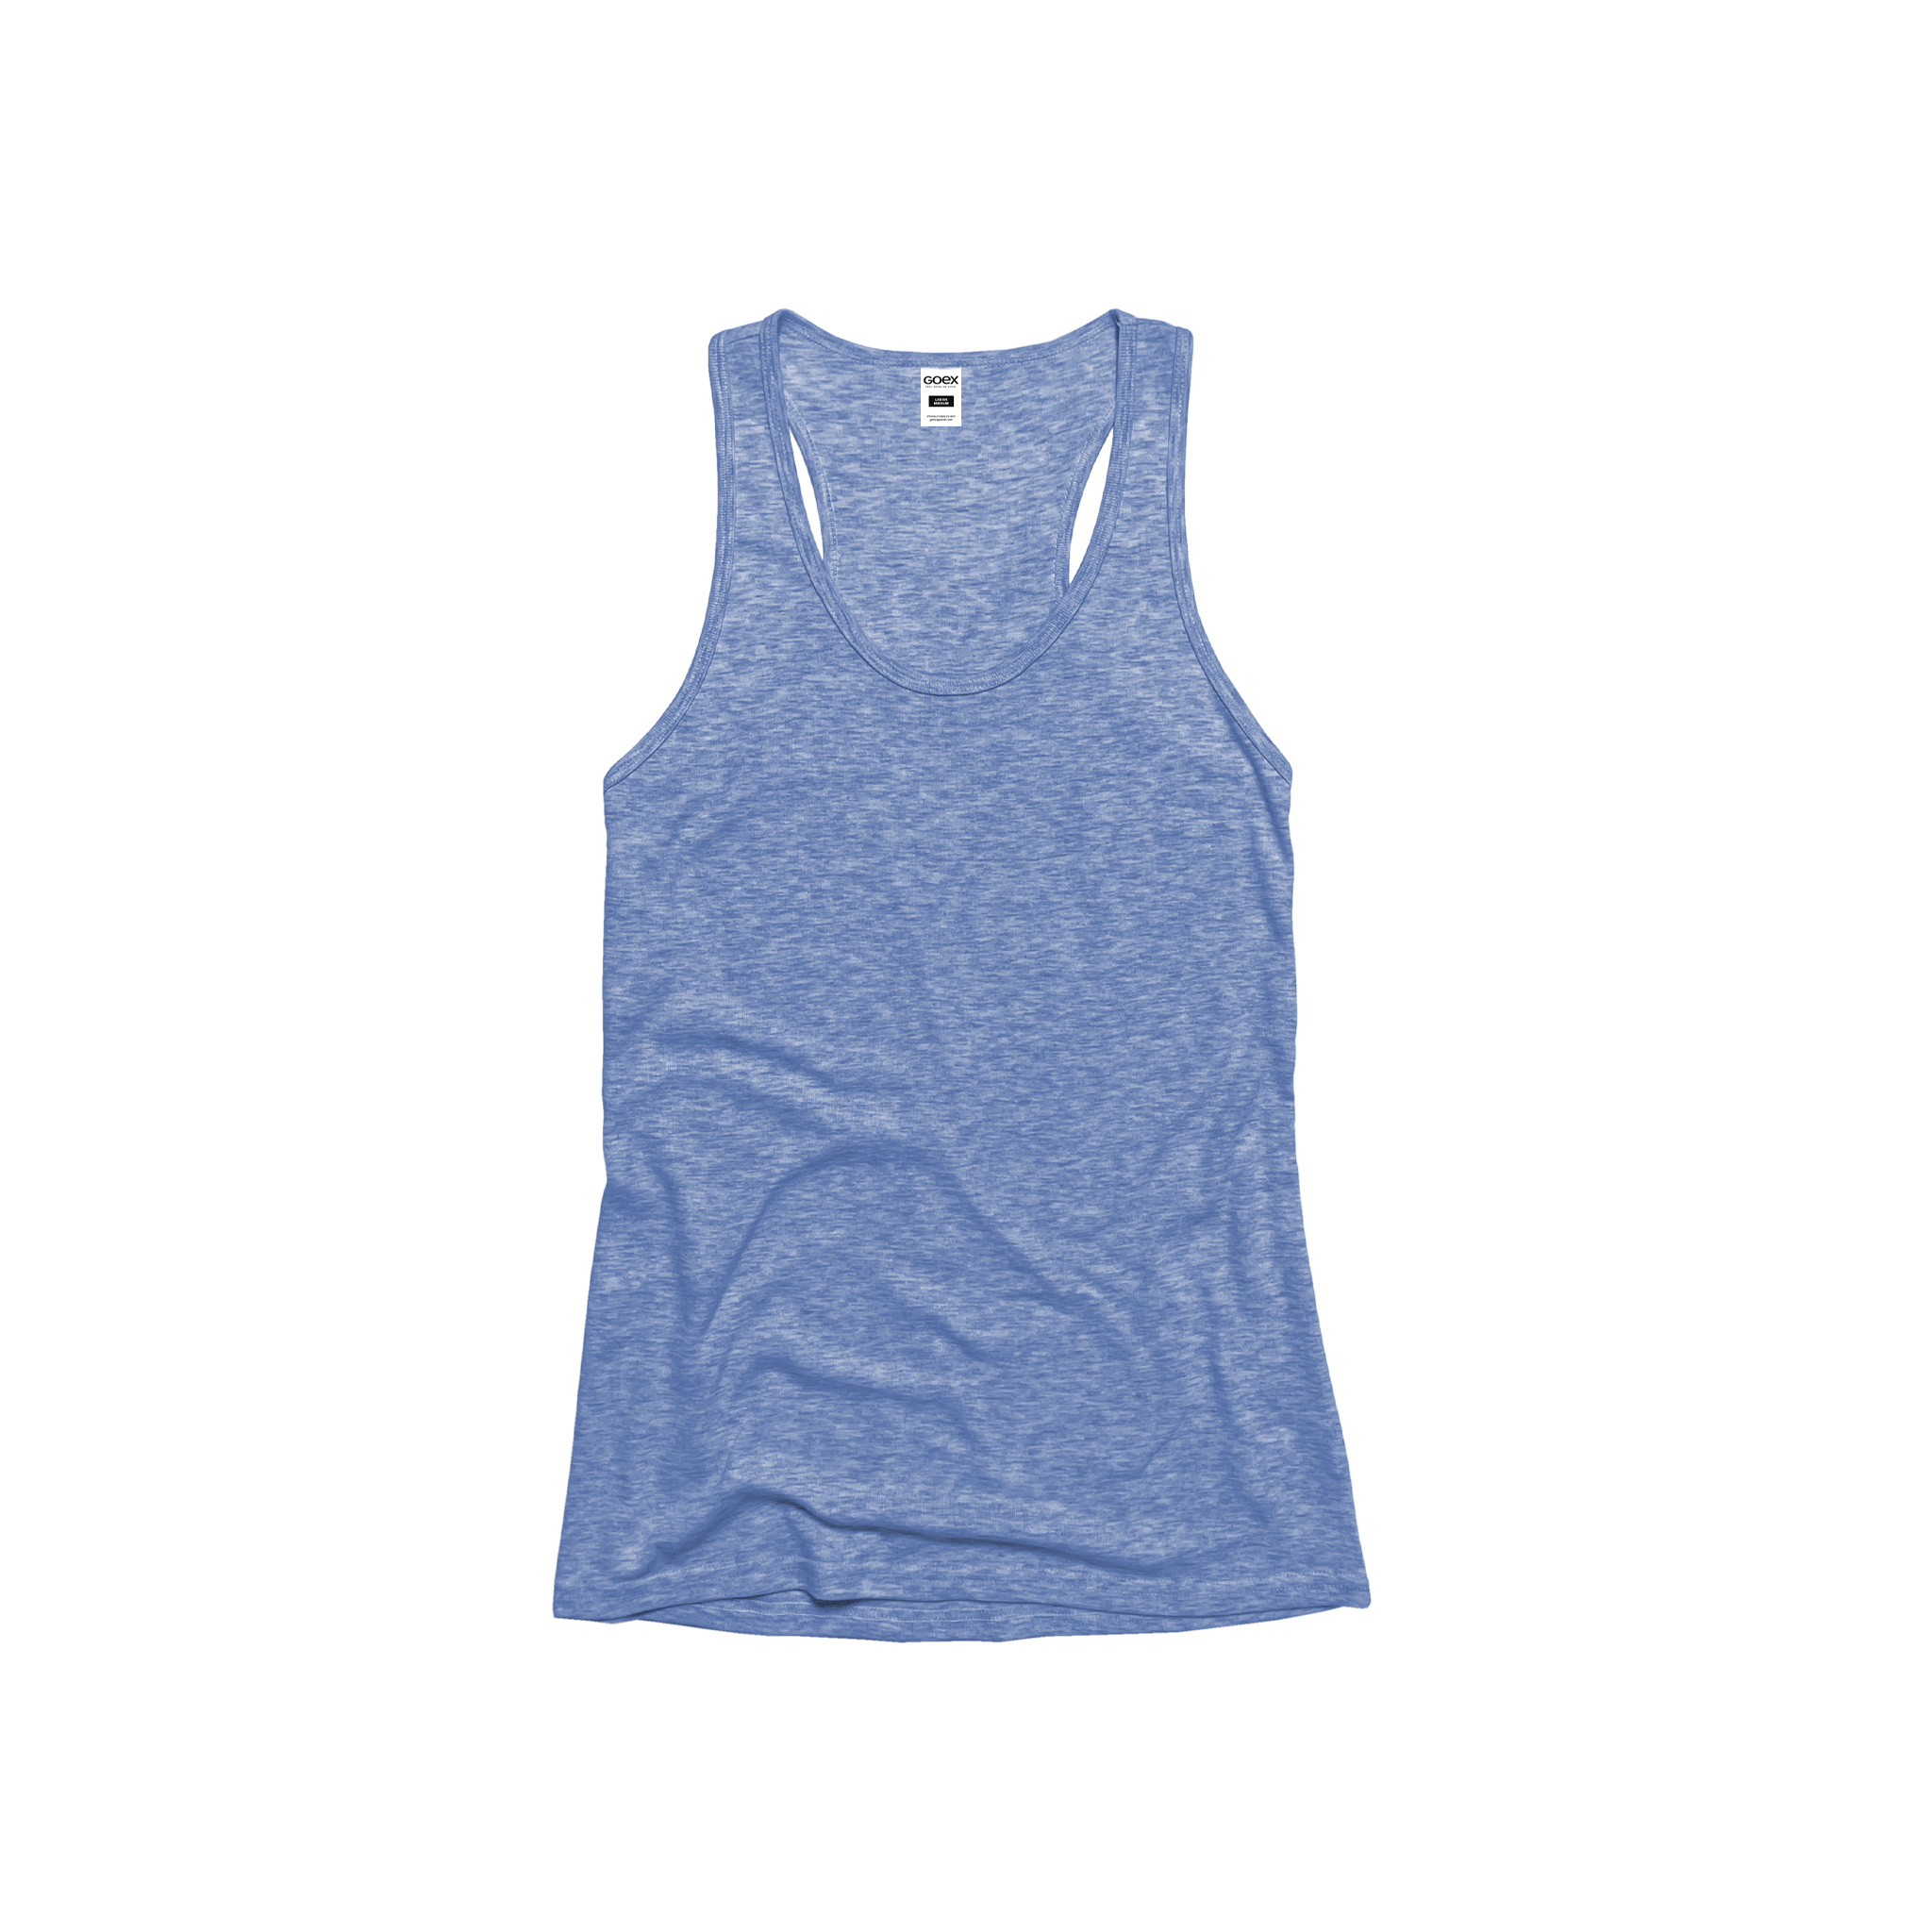 Front Flat Lay of GOEX Ladies Eco Triblend Rib Tank in Light Blue